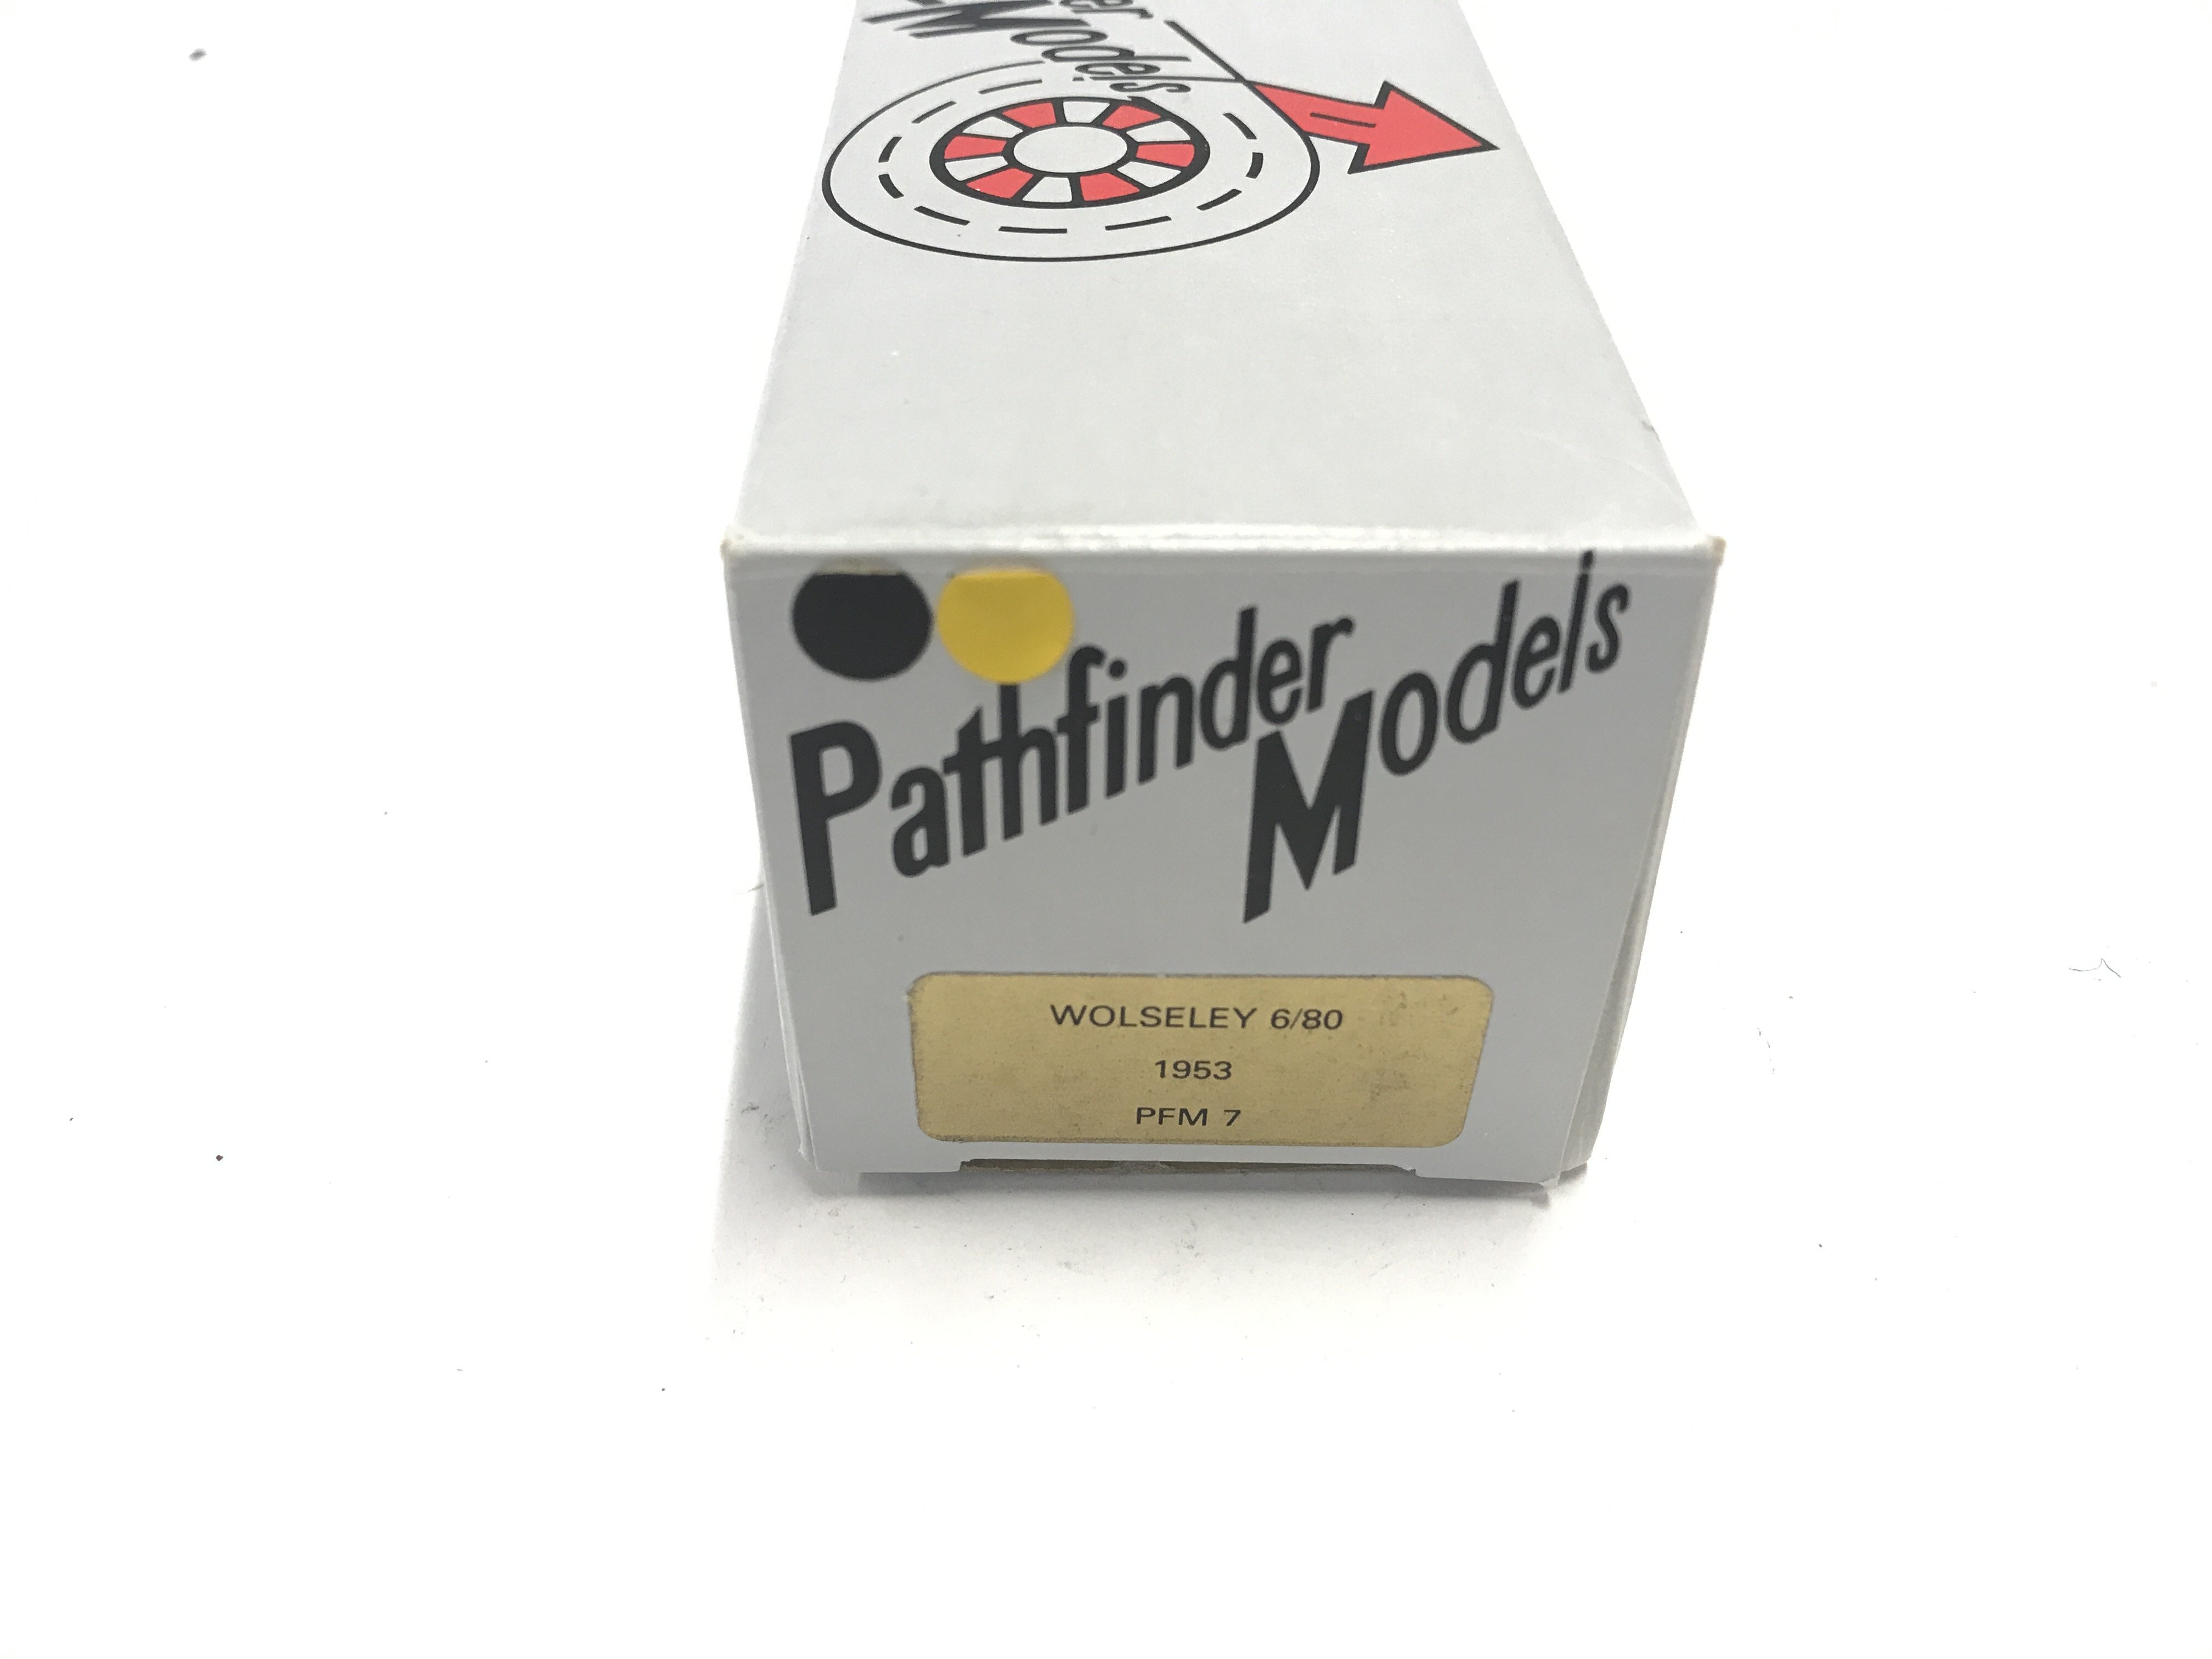 A Boxed Pathfinder Model Wolseley 6/80 1953. 1:43 scale. - Image 3 of 3